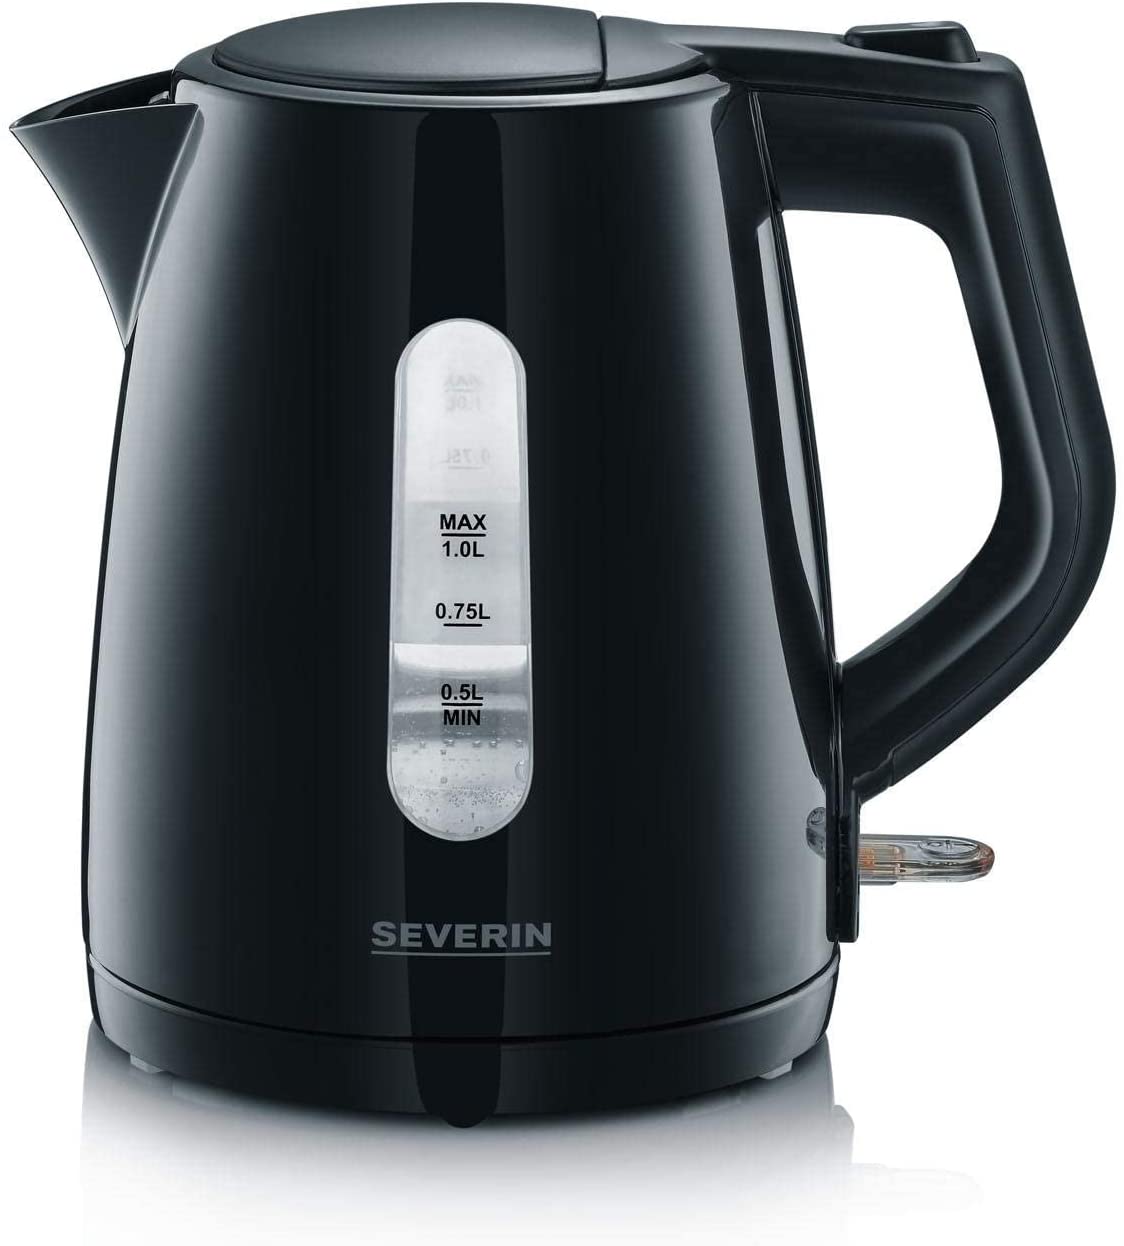 SEVERIN WK 3410 Kettle 1.0 Litre Powerful and Compact Kettle in High-Quality Design Electric Kettle with Limescale Filter Black